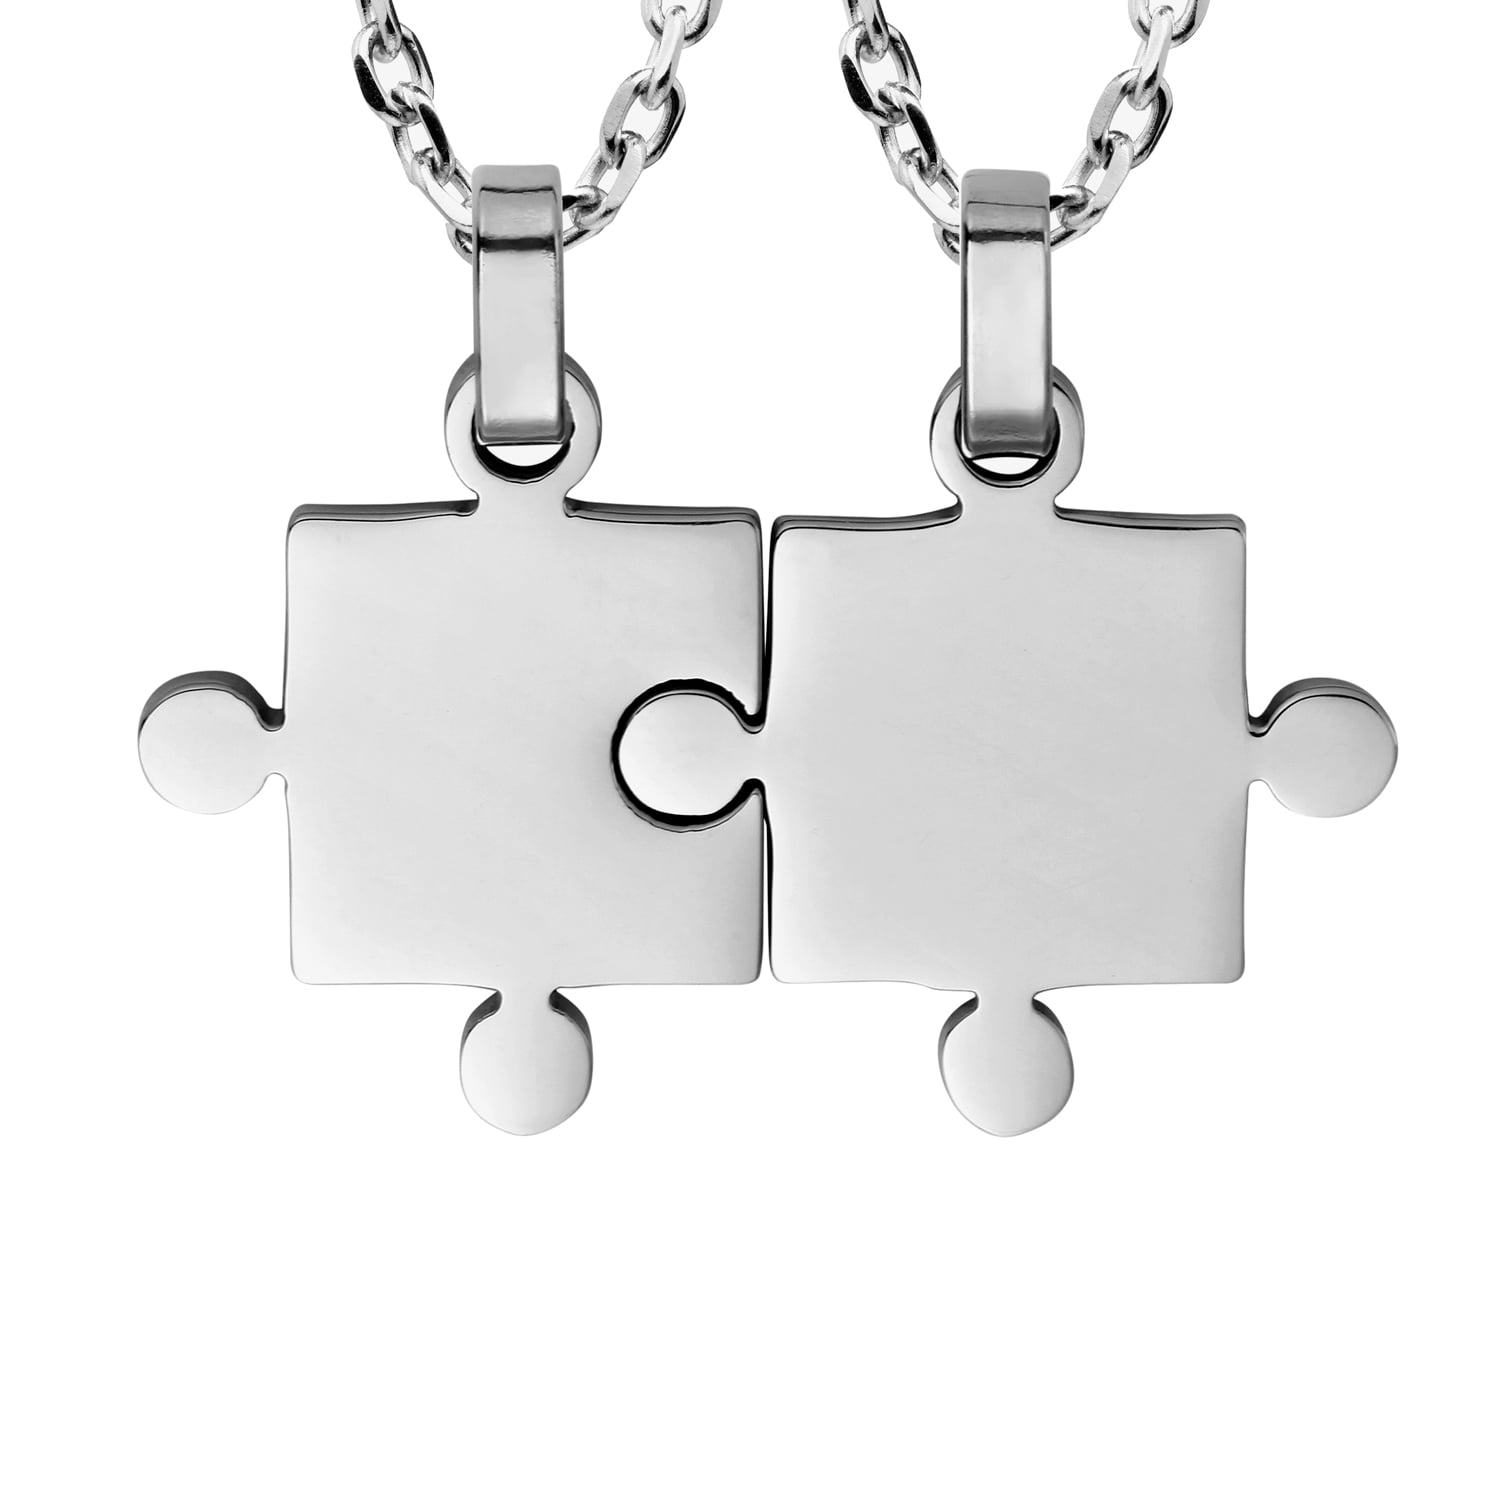 Puzzle Piece Necklace Set for Two in Stainless Steel His and Hers Necklace